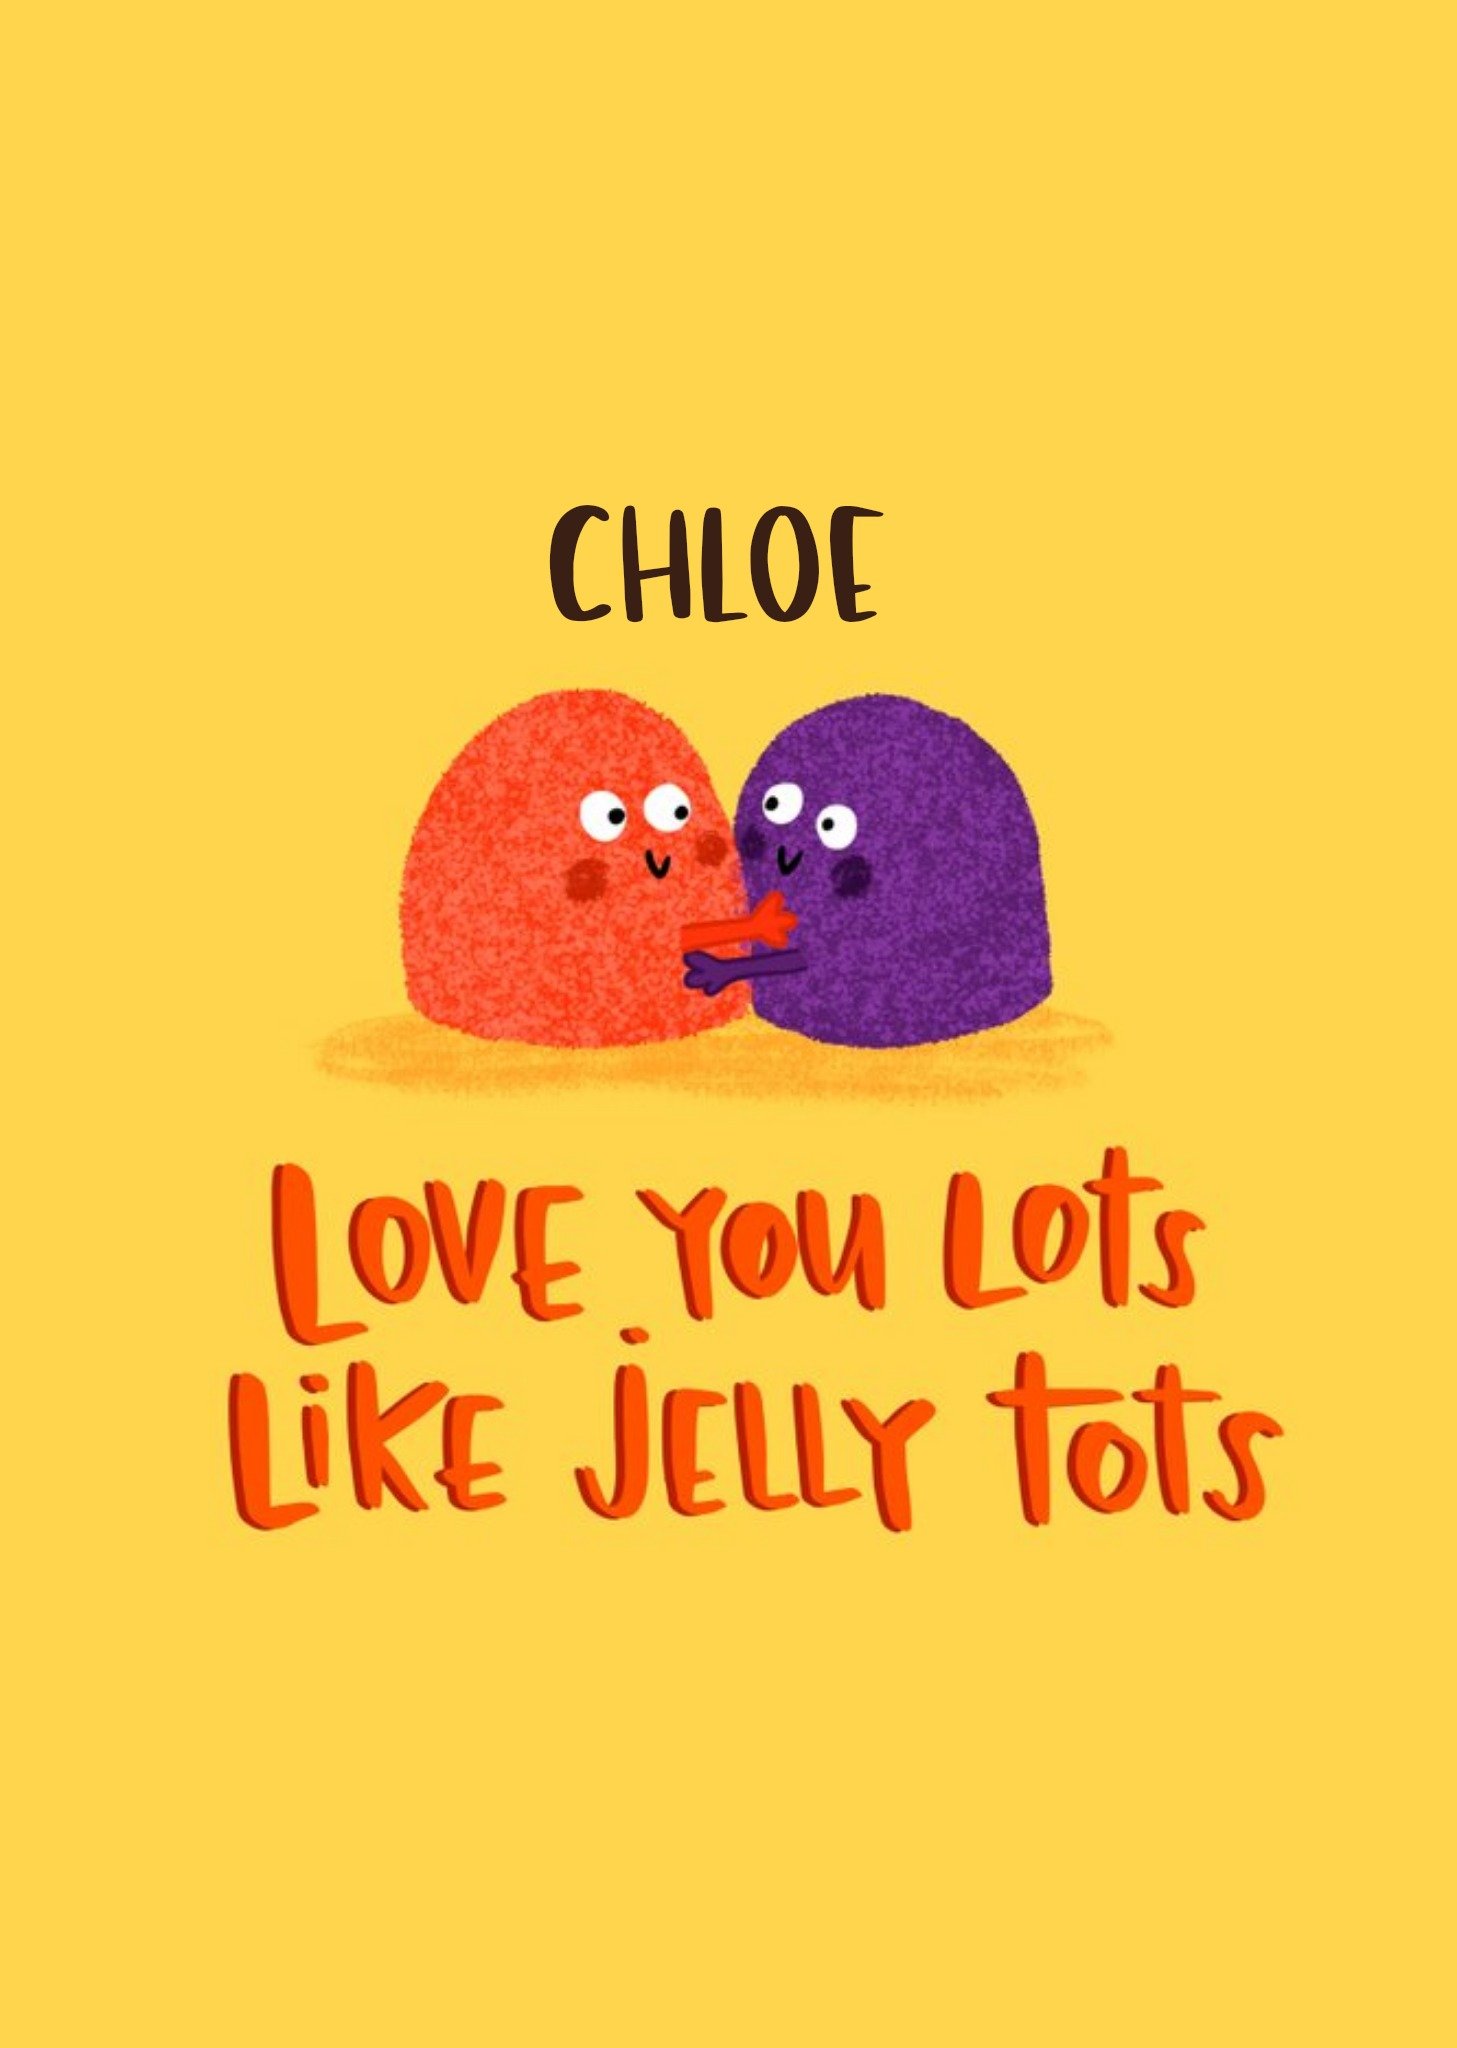 Moonpig Sweets Hugging Love You Lots Like Jelly Tots Thinking Of You Card Ecard